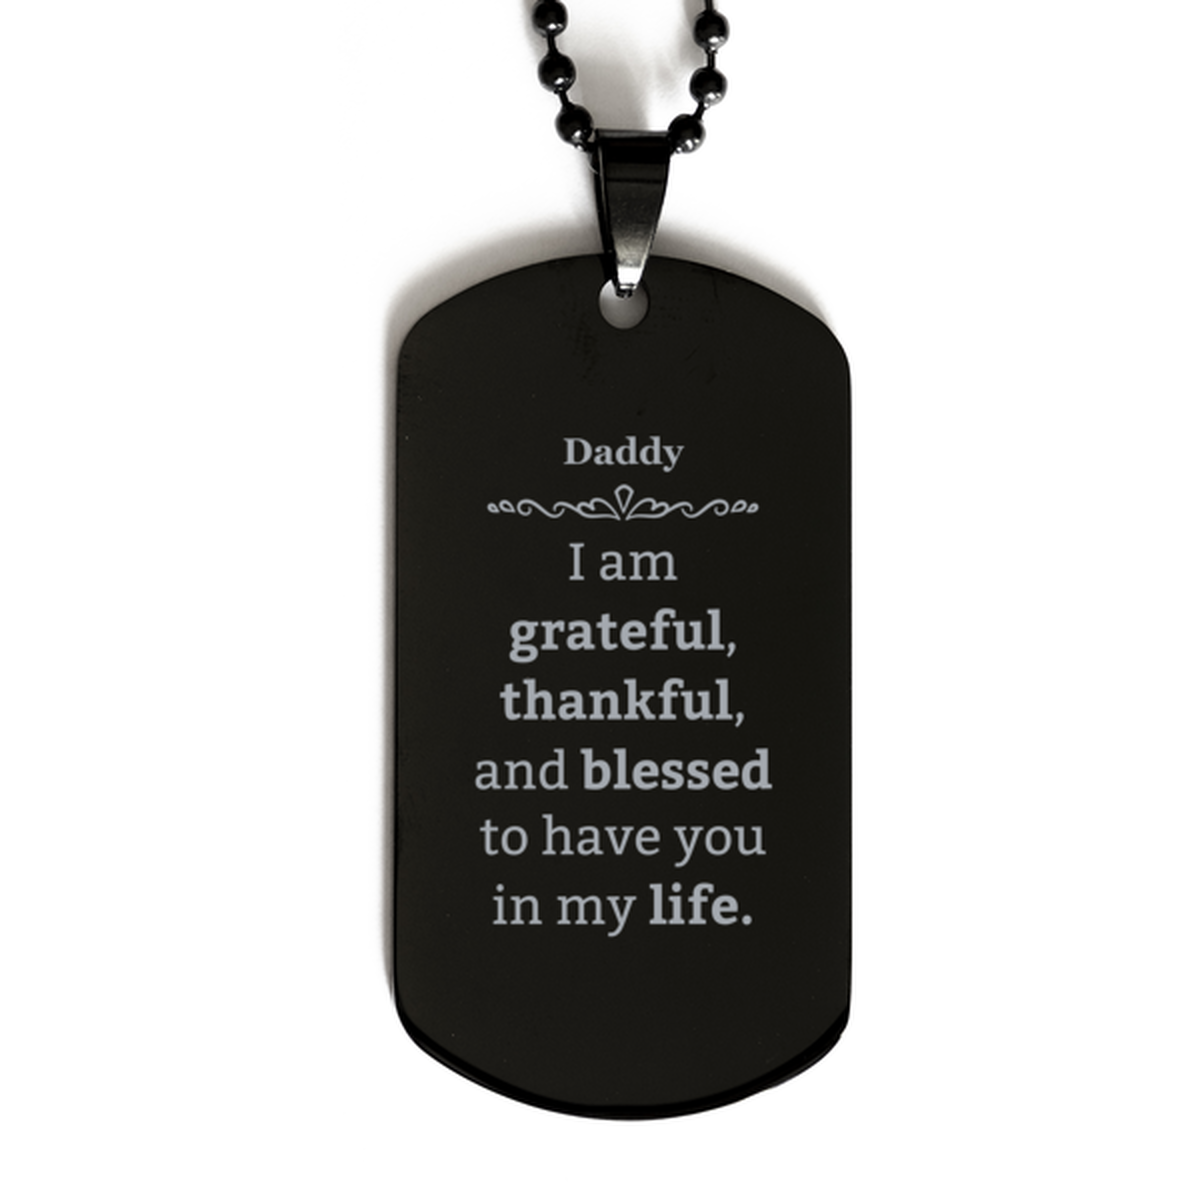 Daddy Appreciation Gifts, I am grateful, thankful, and blessed, Thank You Black Dog Tag for Daddy, Birthday Inspiration Gifts for Daddy